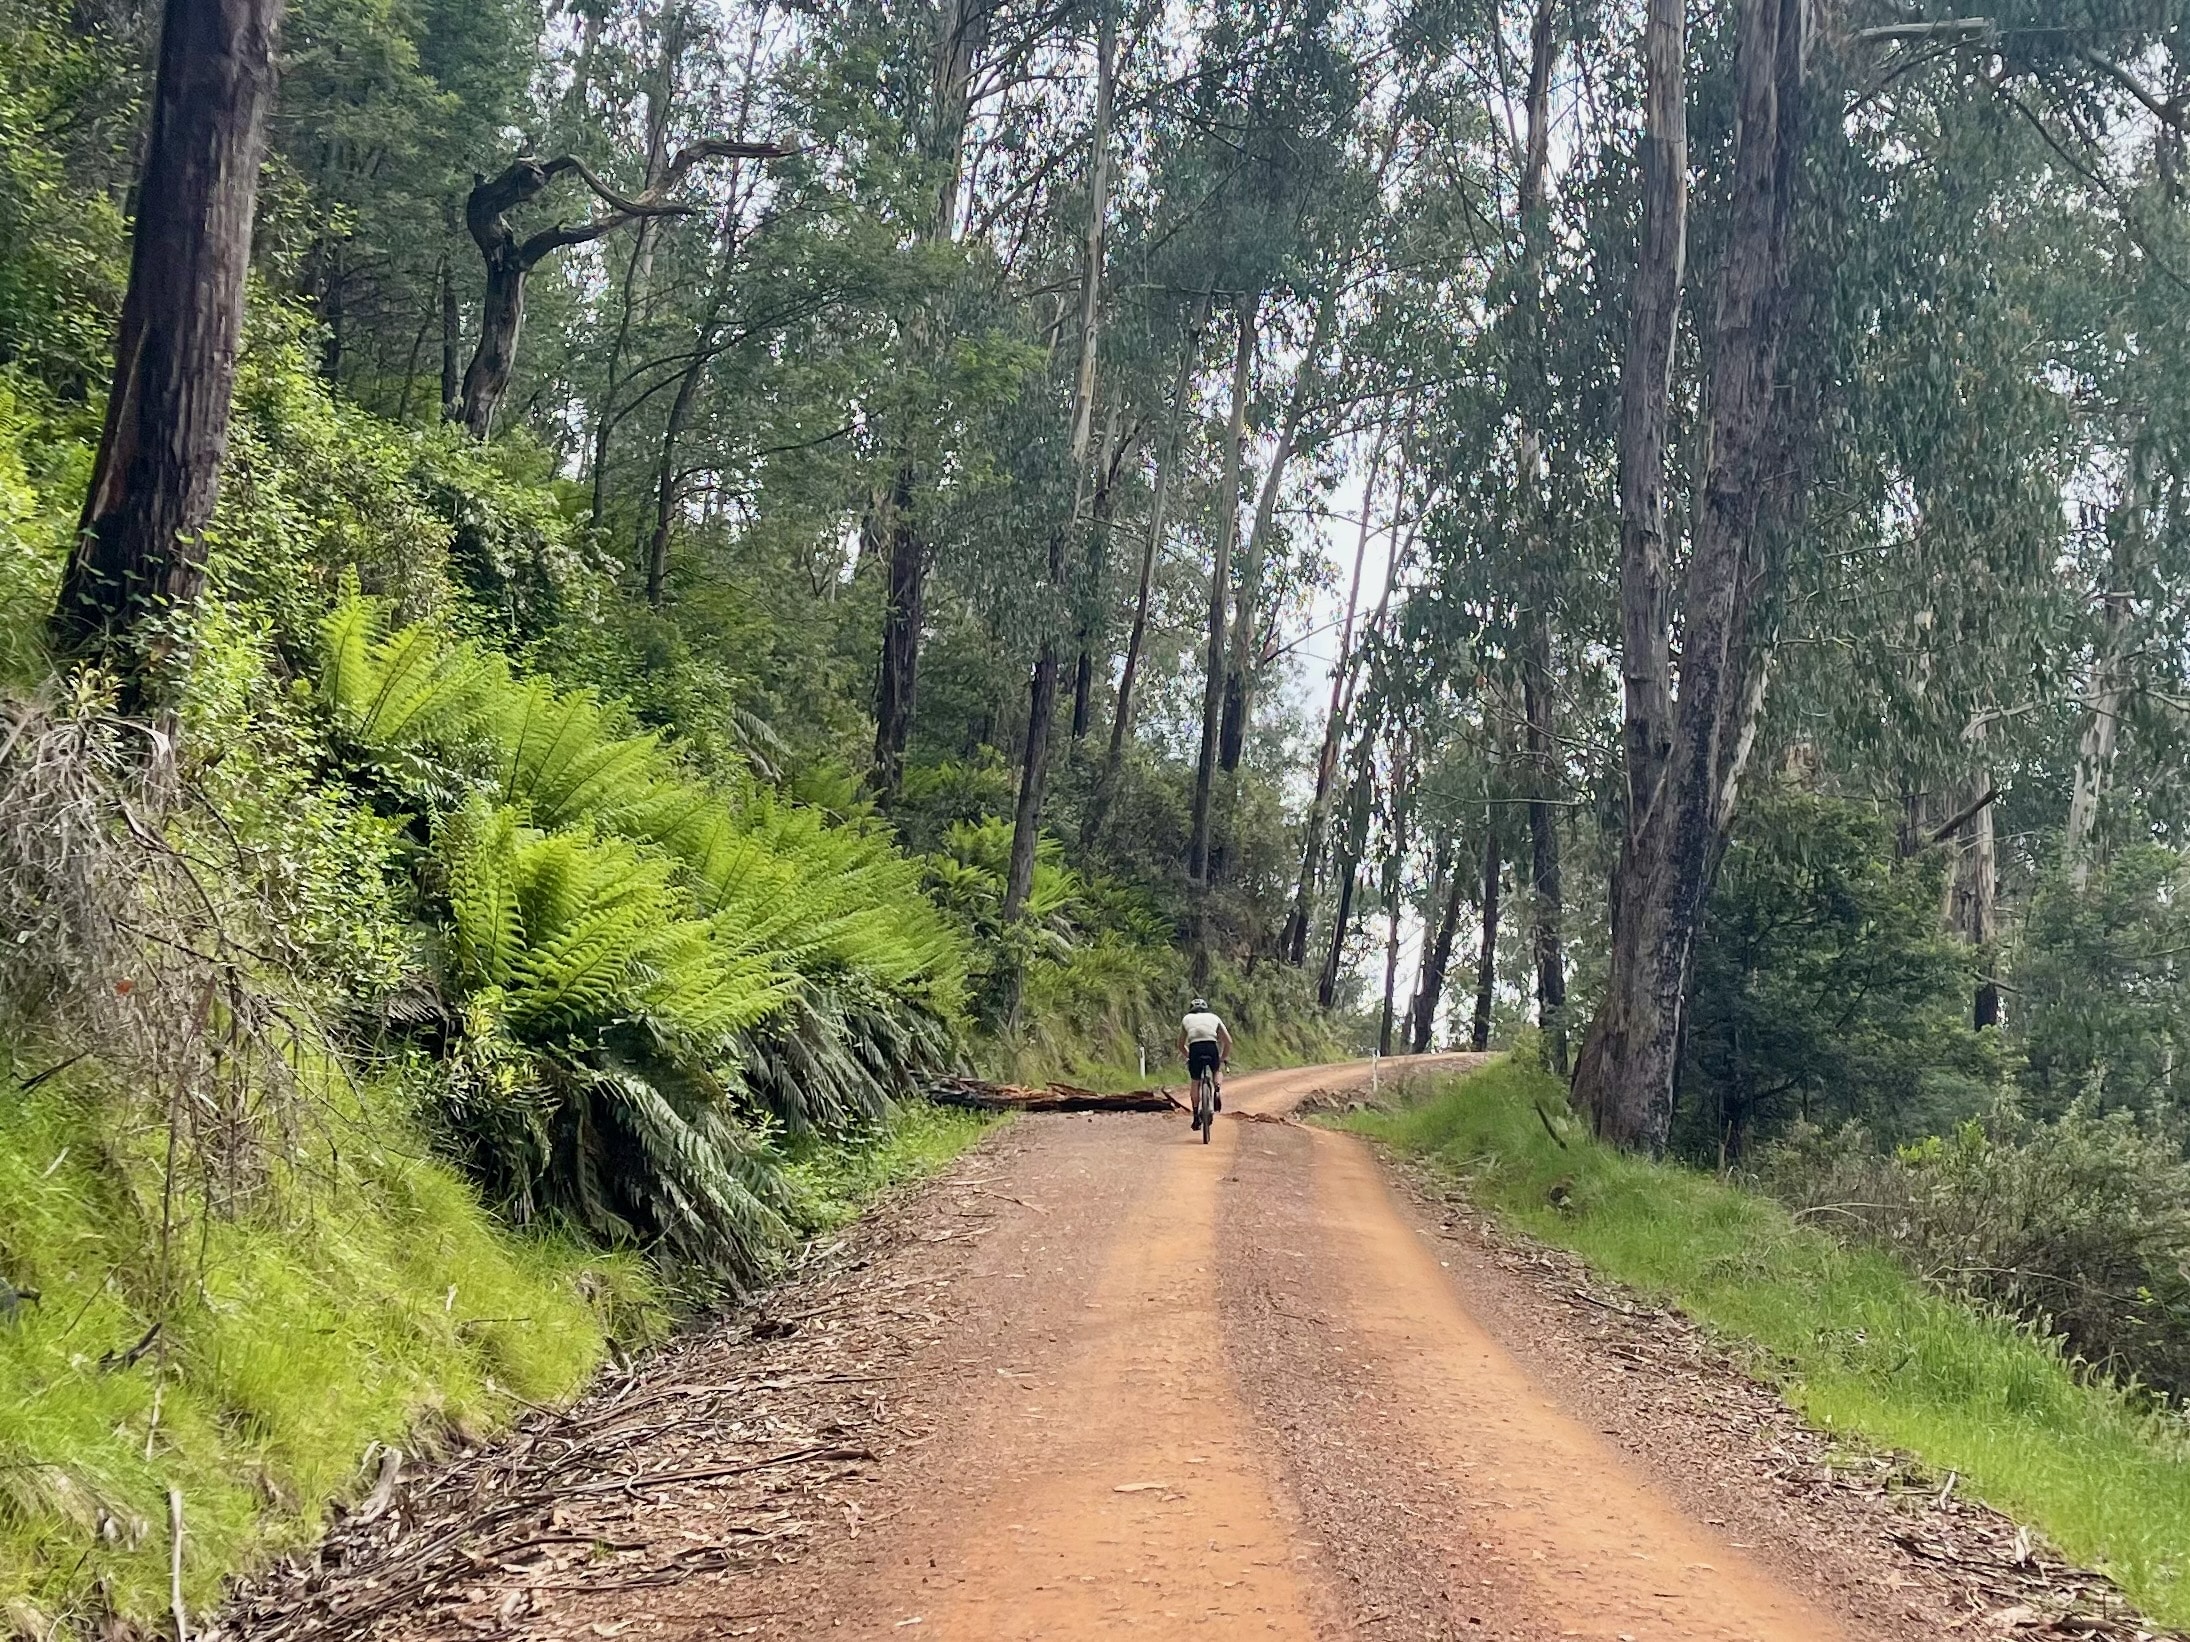 A cyclist riding up a smooth gravel road past a fallen tree surrounded by large green ferns and native bushland